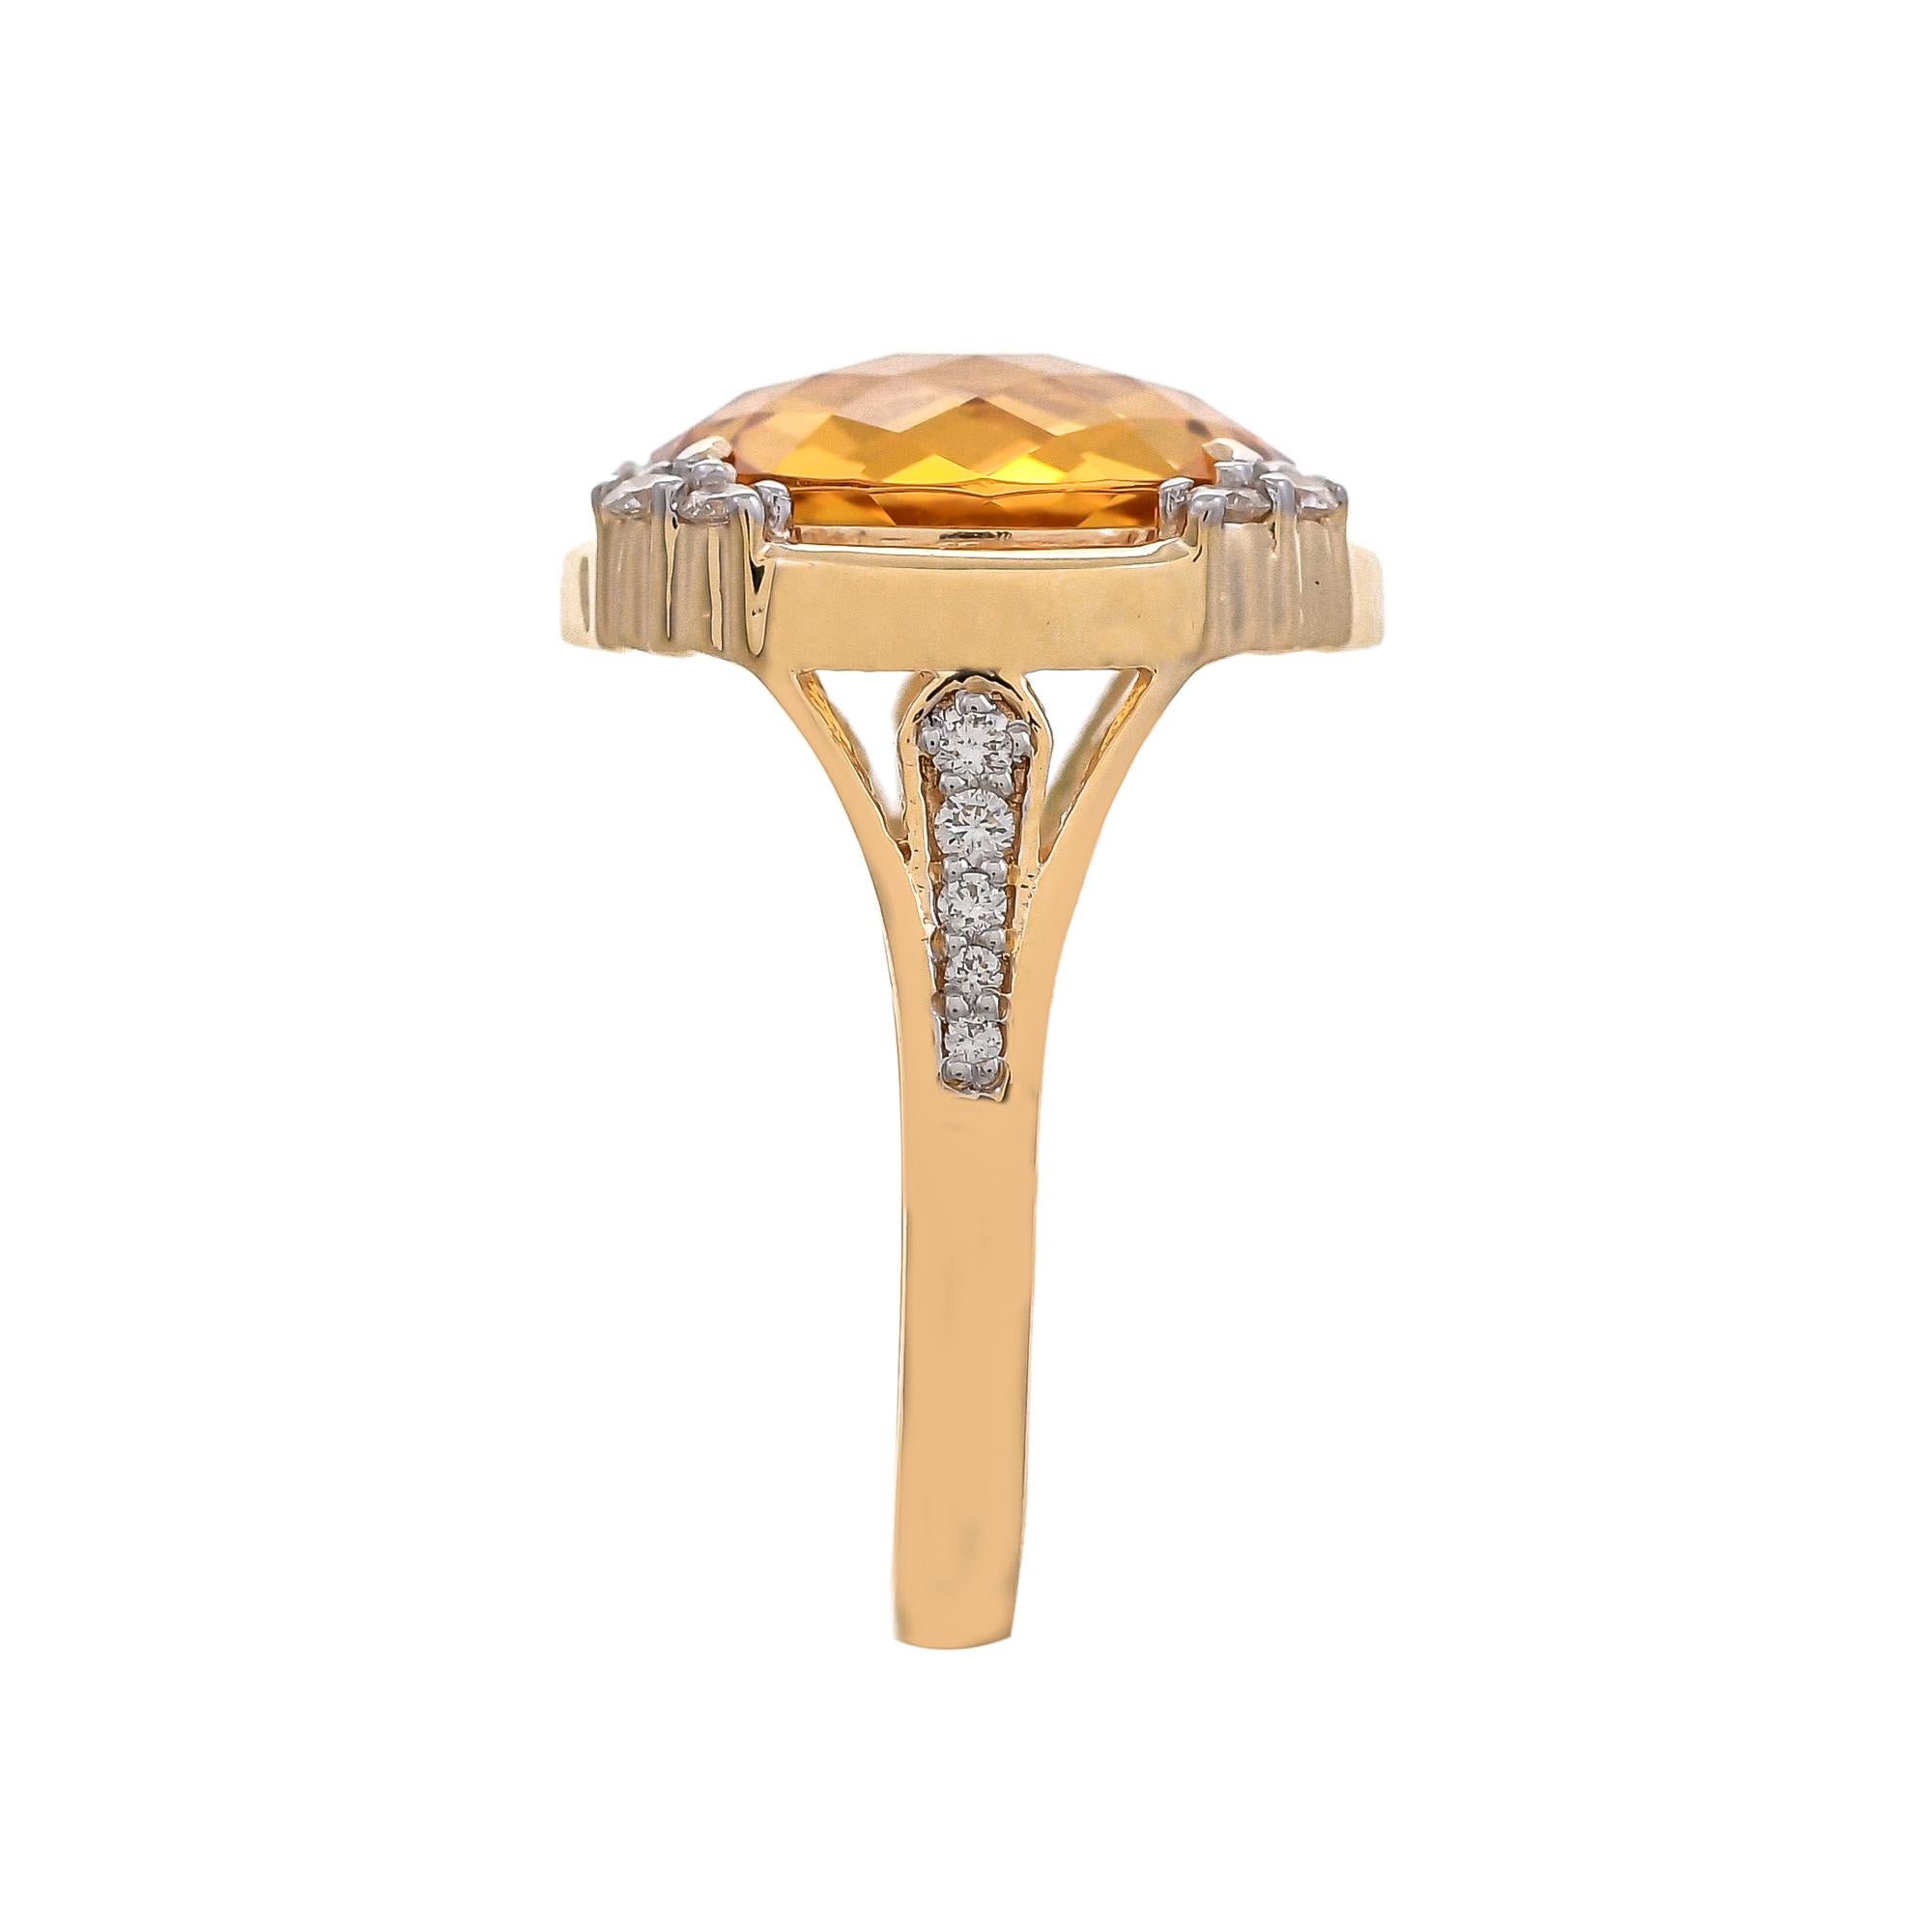 Centring on an oval-shaped citrine weighing approximately 5.63 carats, set on four sides with round shaped diamonds to a diamond set and openwork shoulders with a total diamond weight of approximately 0.34 carats, mounted in 18 karats yellow gold.